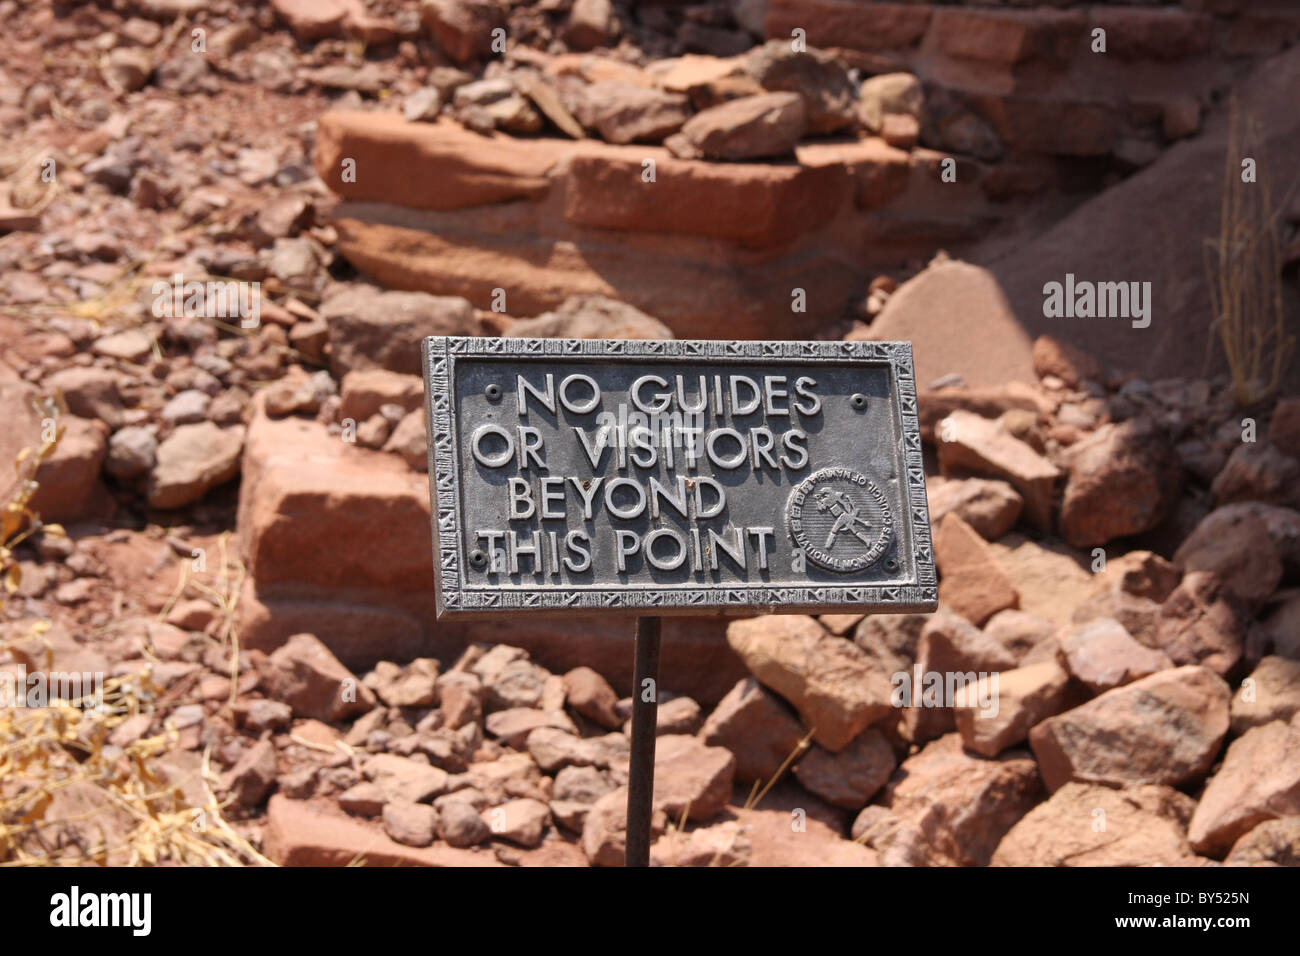 No visitors sign at Twyfelfontein in Namibia where there are rock carvings Stock Photo